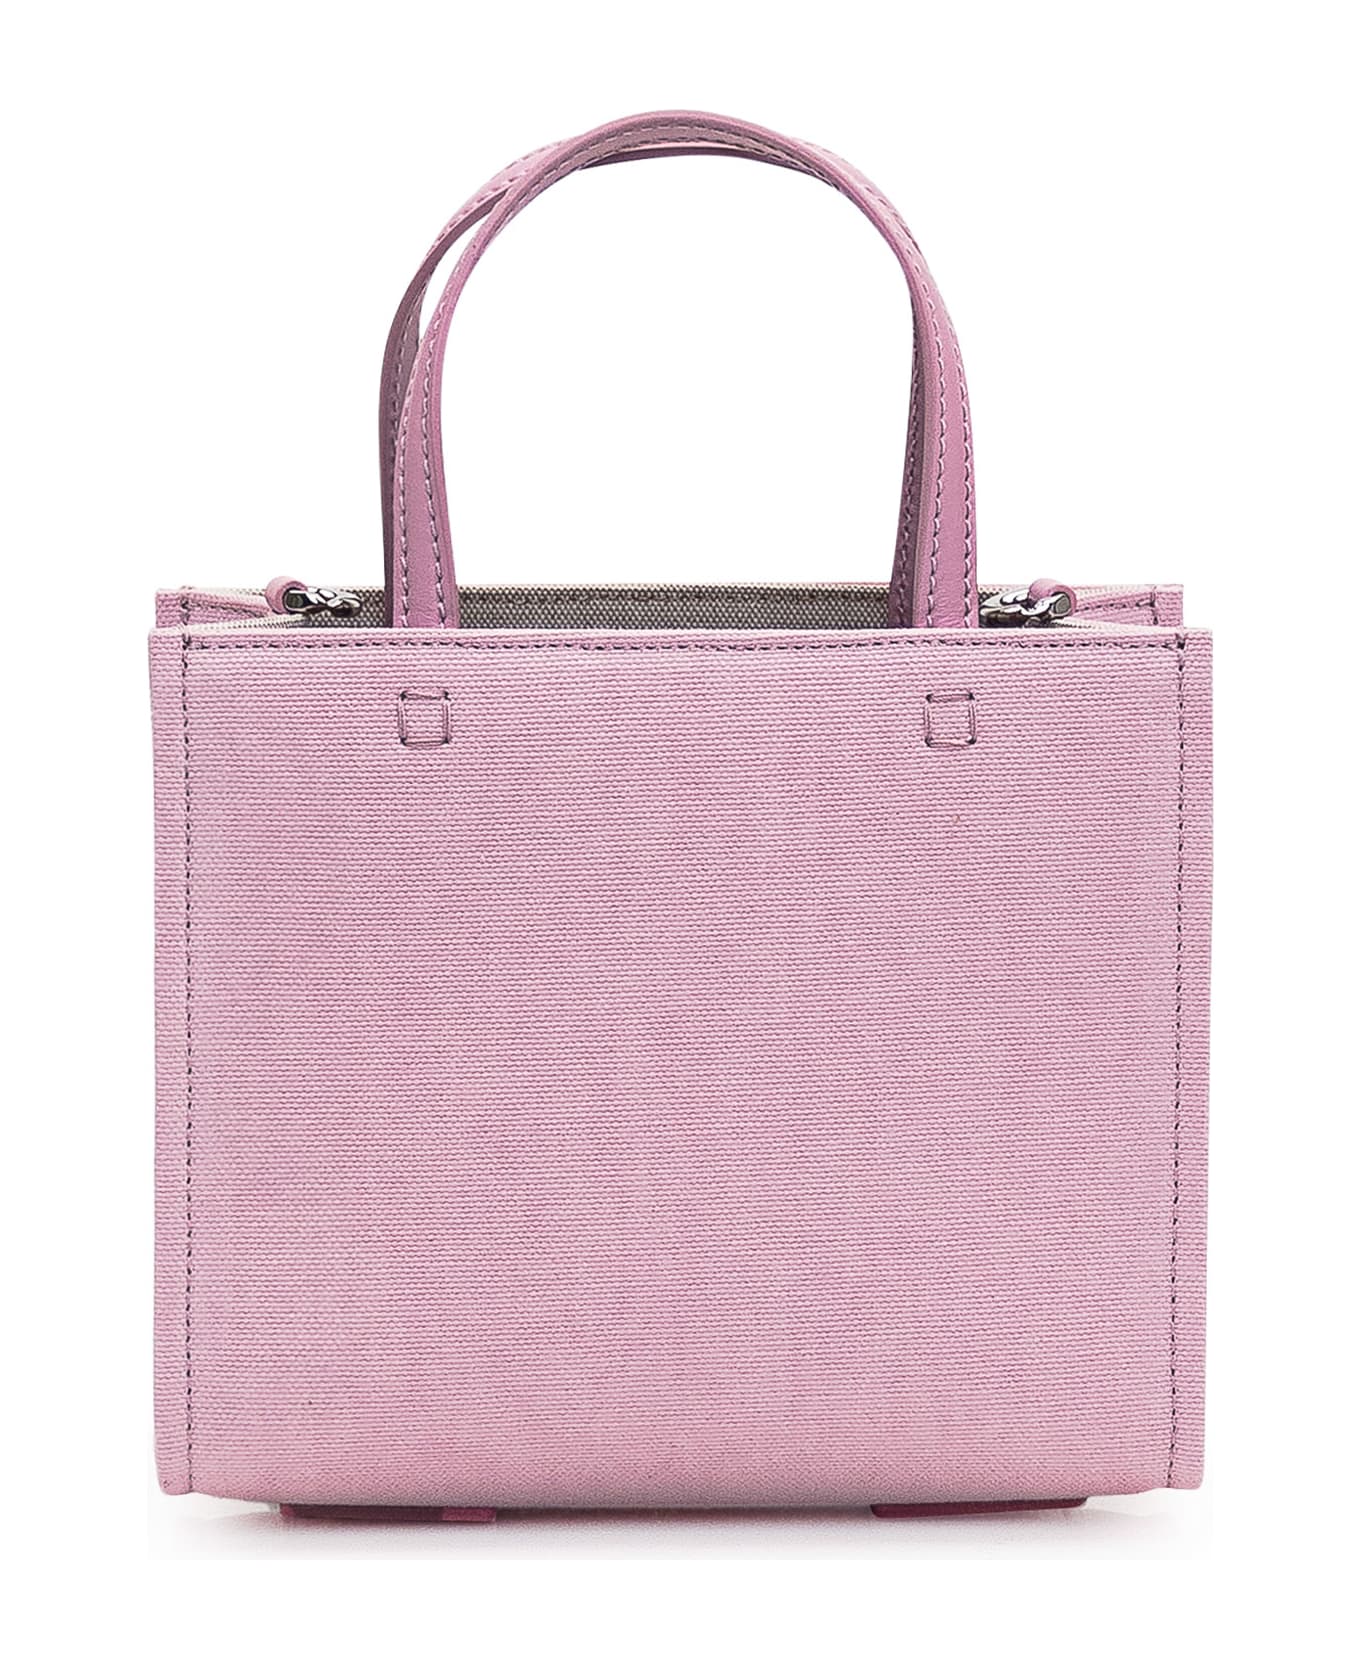 Givenchy G-tote Mini Bag - Old Pink トートバッグ